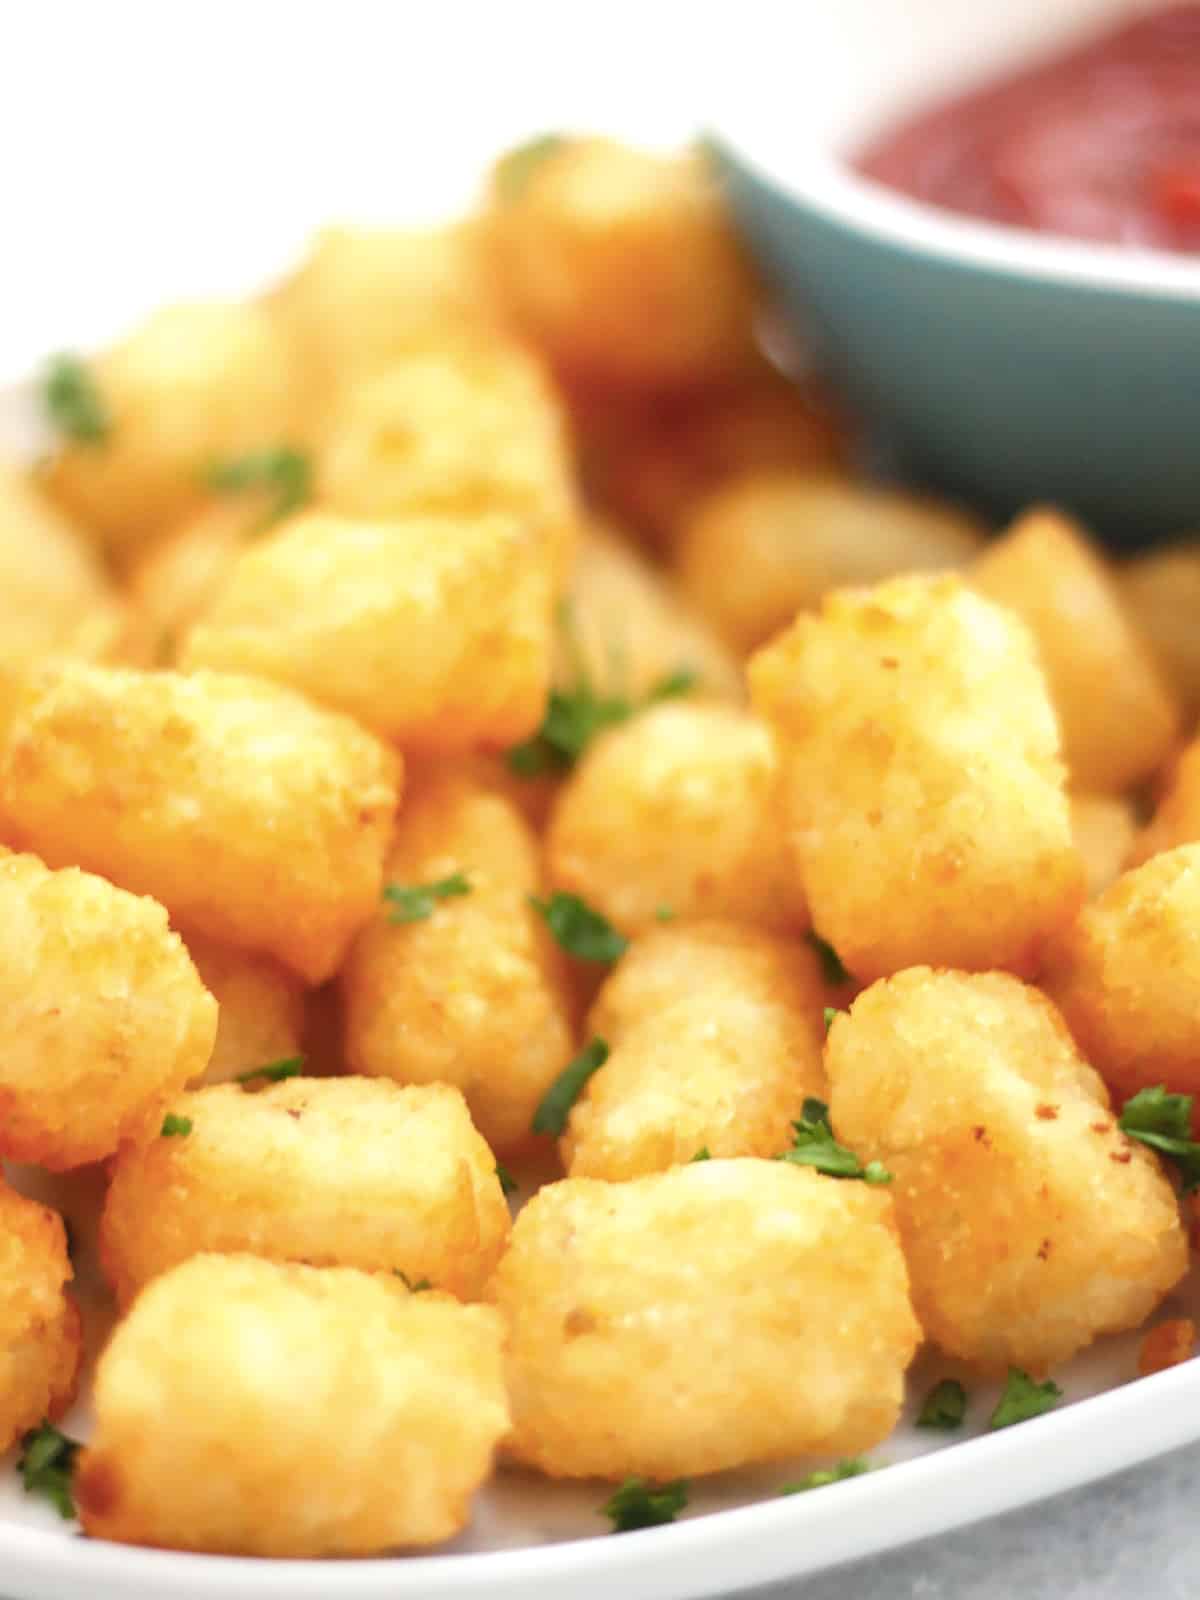 Crispy tater tots on a serving plate.